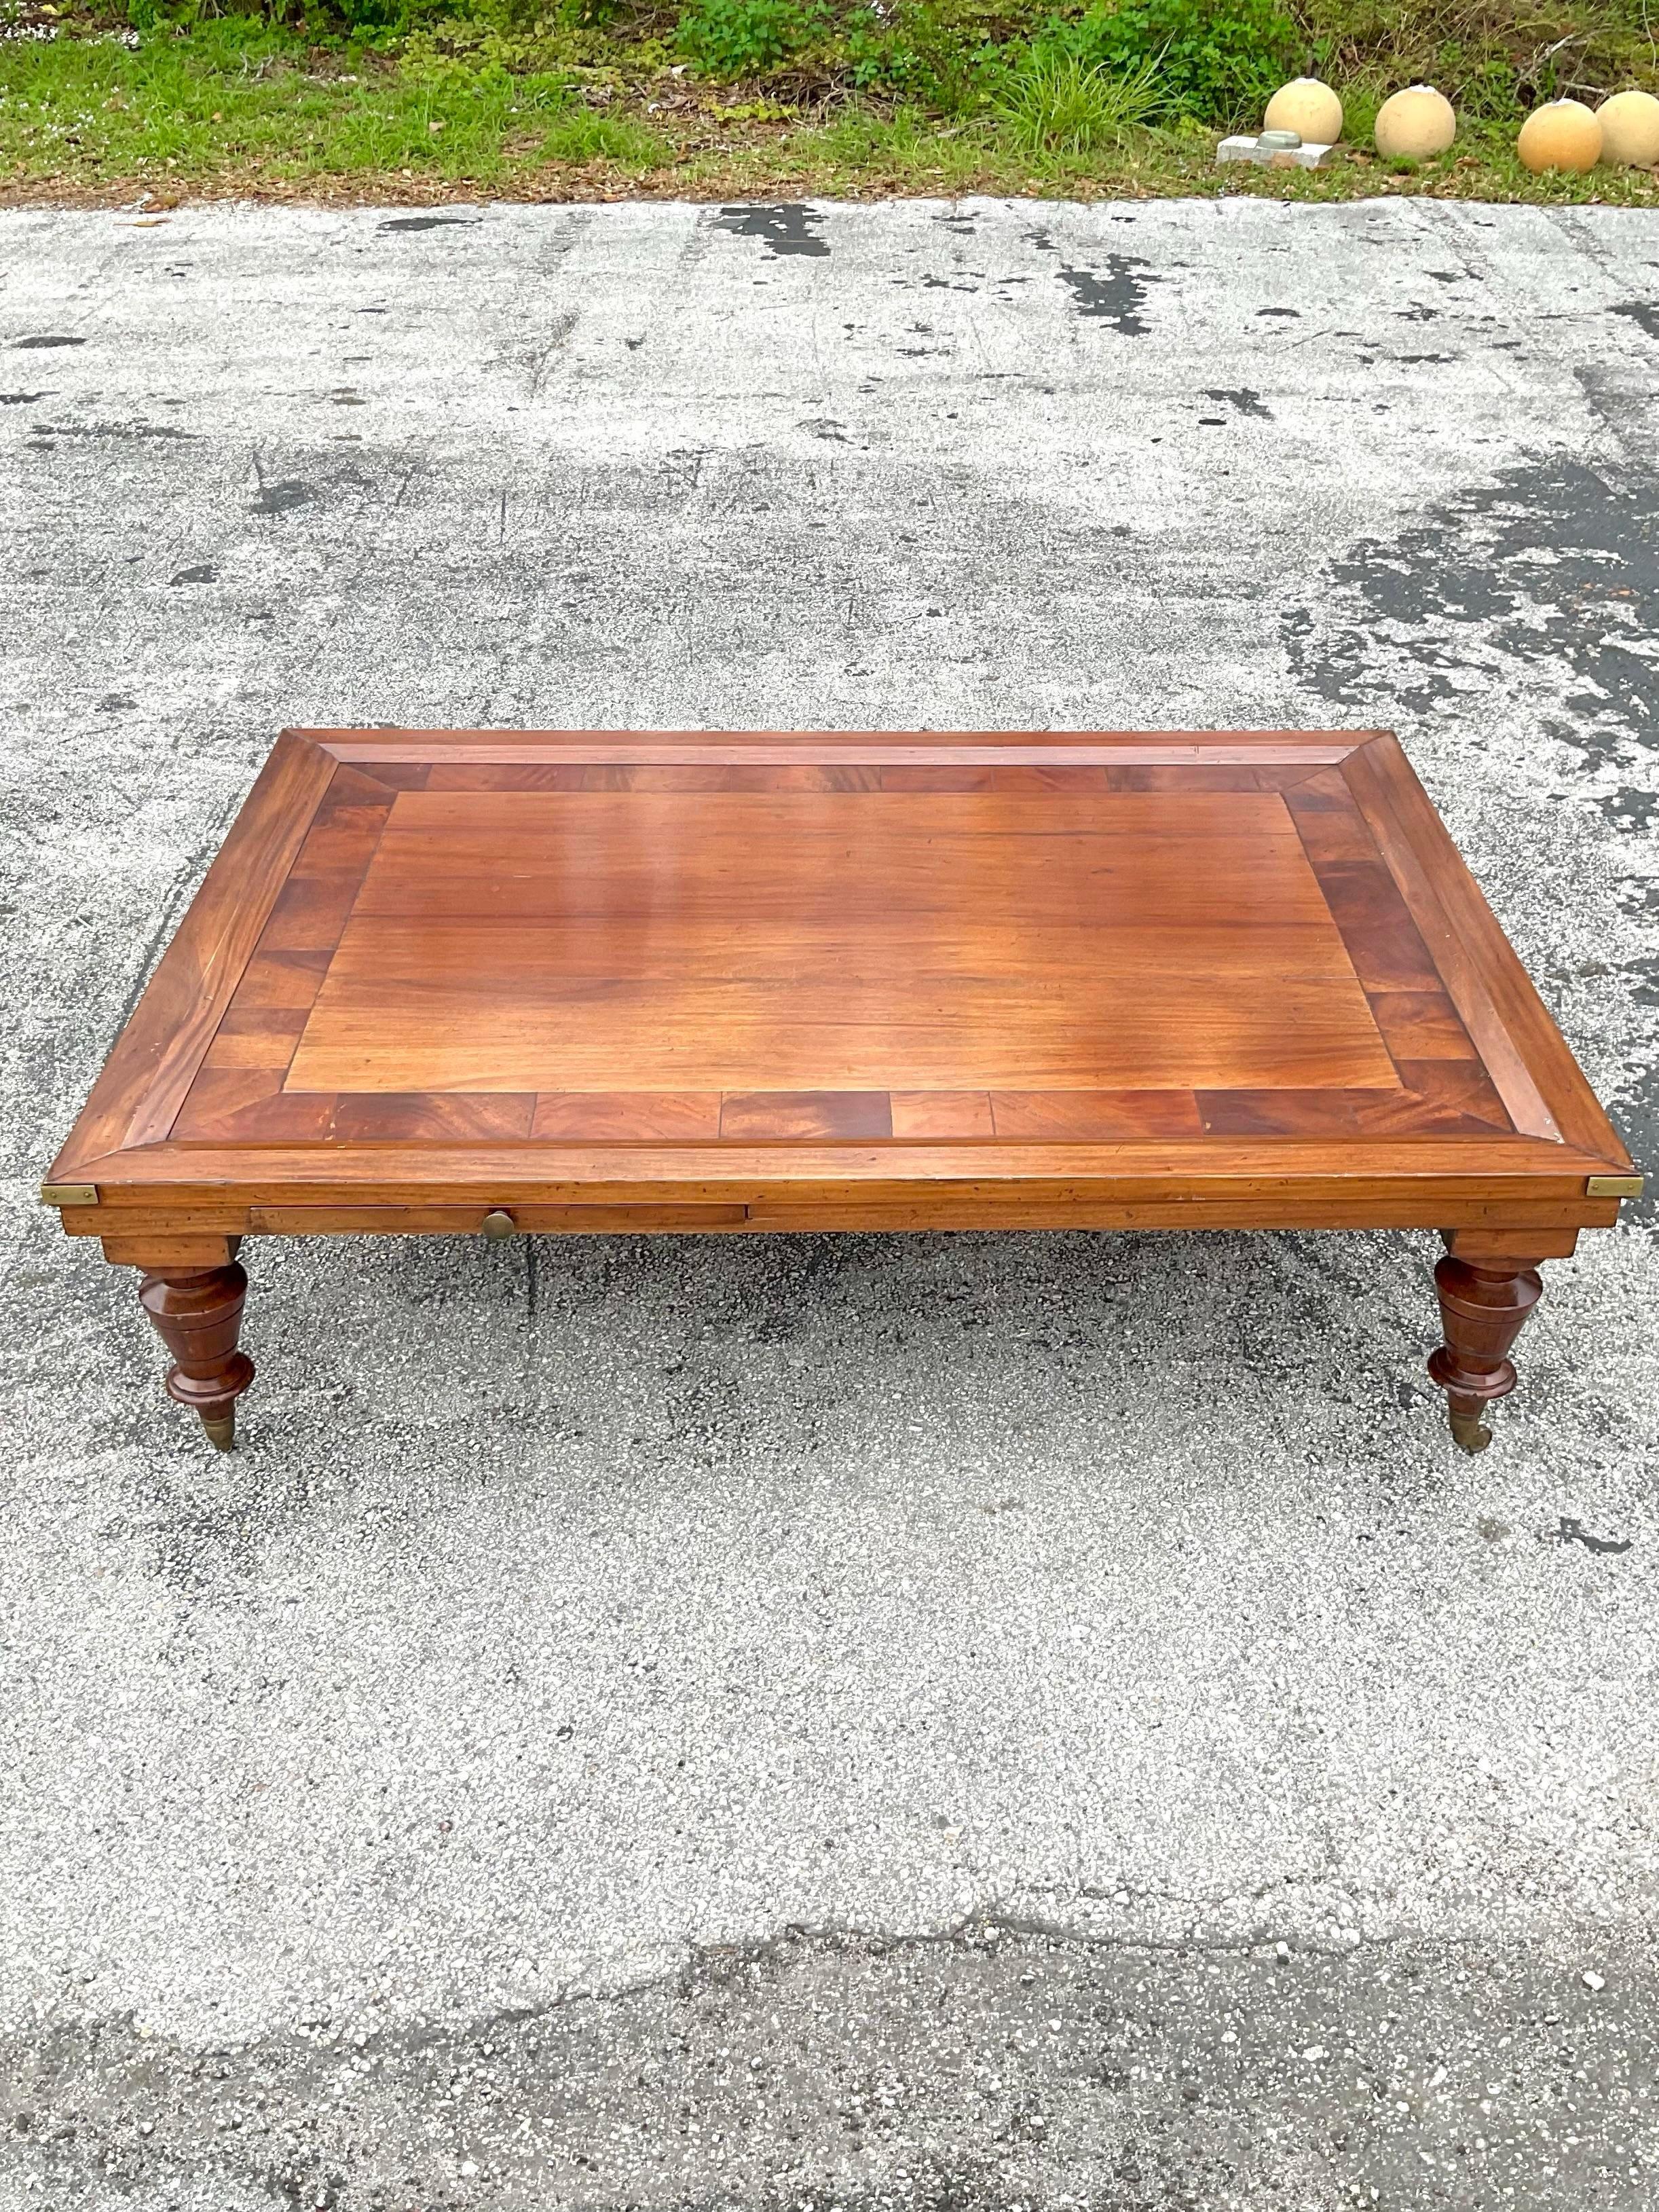 Fantastic vintage coffee table with intricate inlay work bordering the exterior. The details on this table are exquisite, brass accents throughout. Handles on both ends and brass casters ending perfectly carved tapered legs. There are two extendable